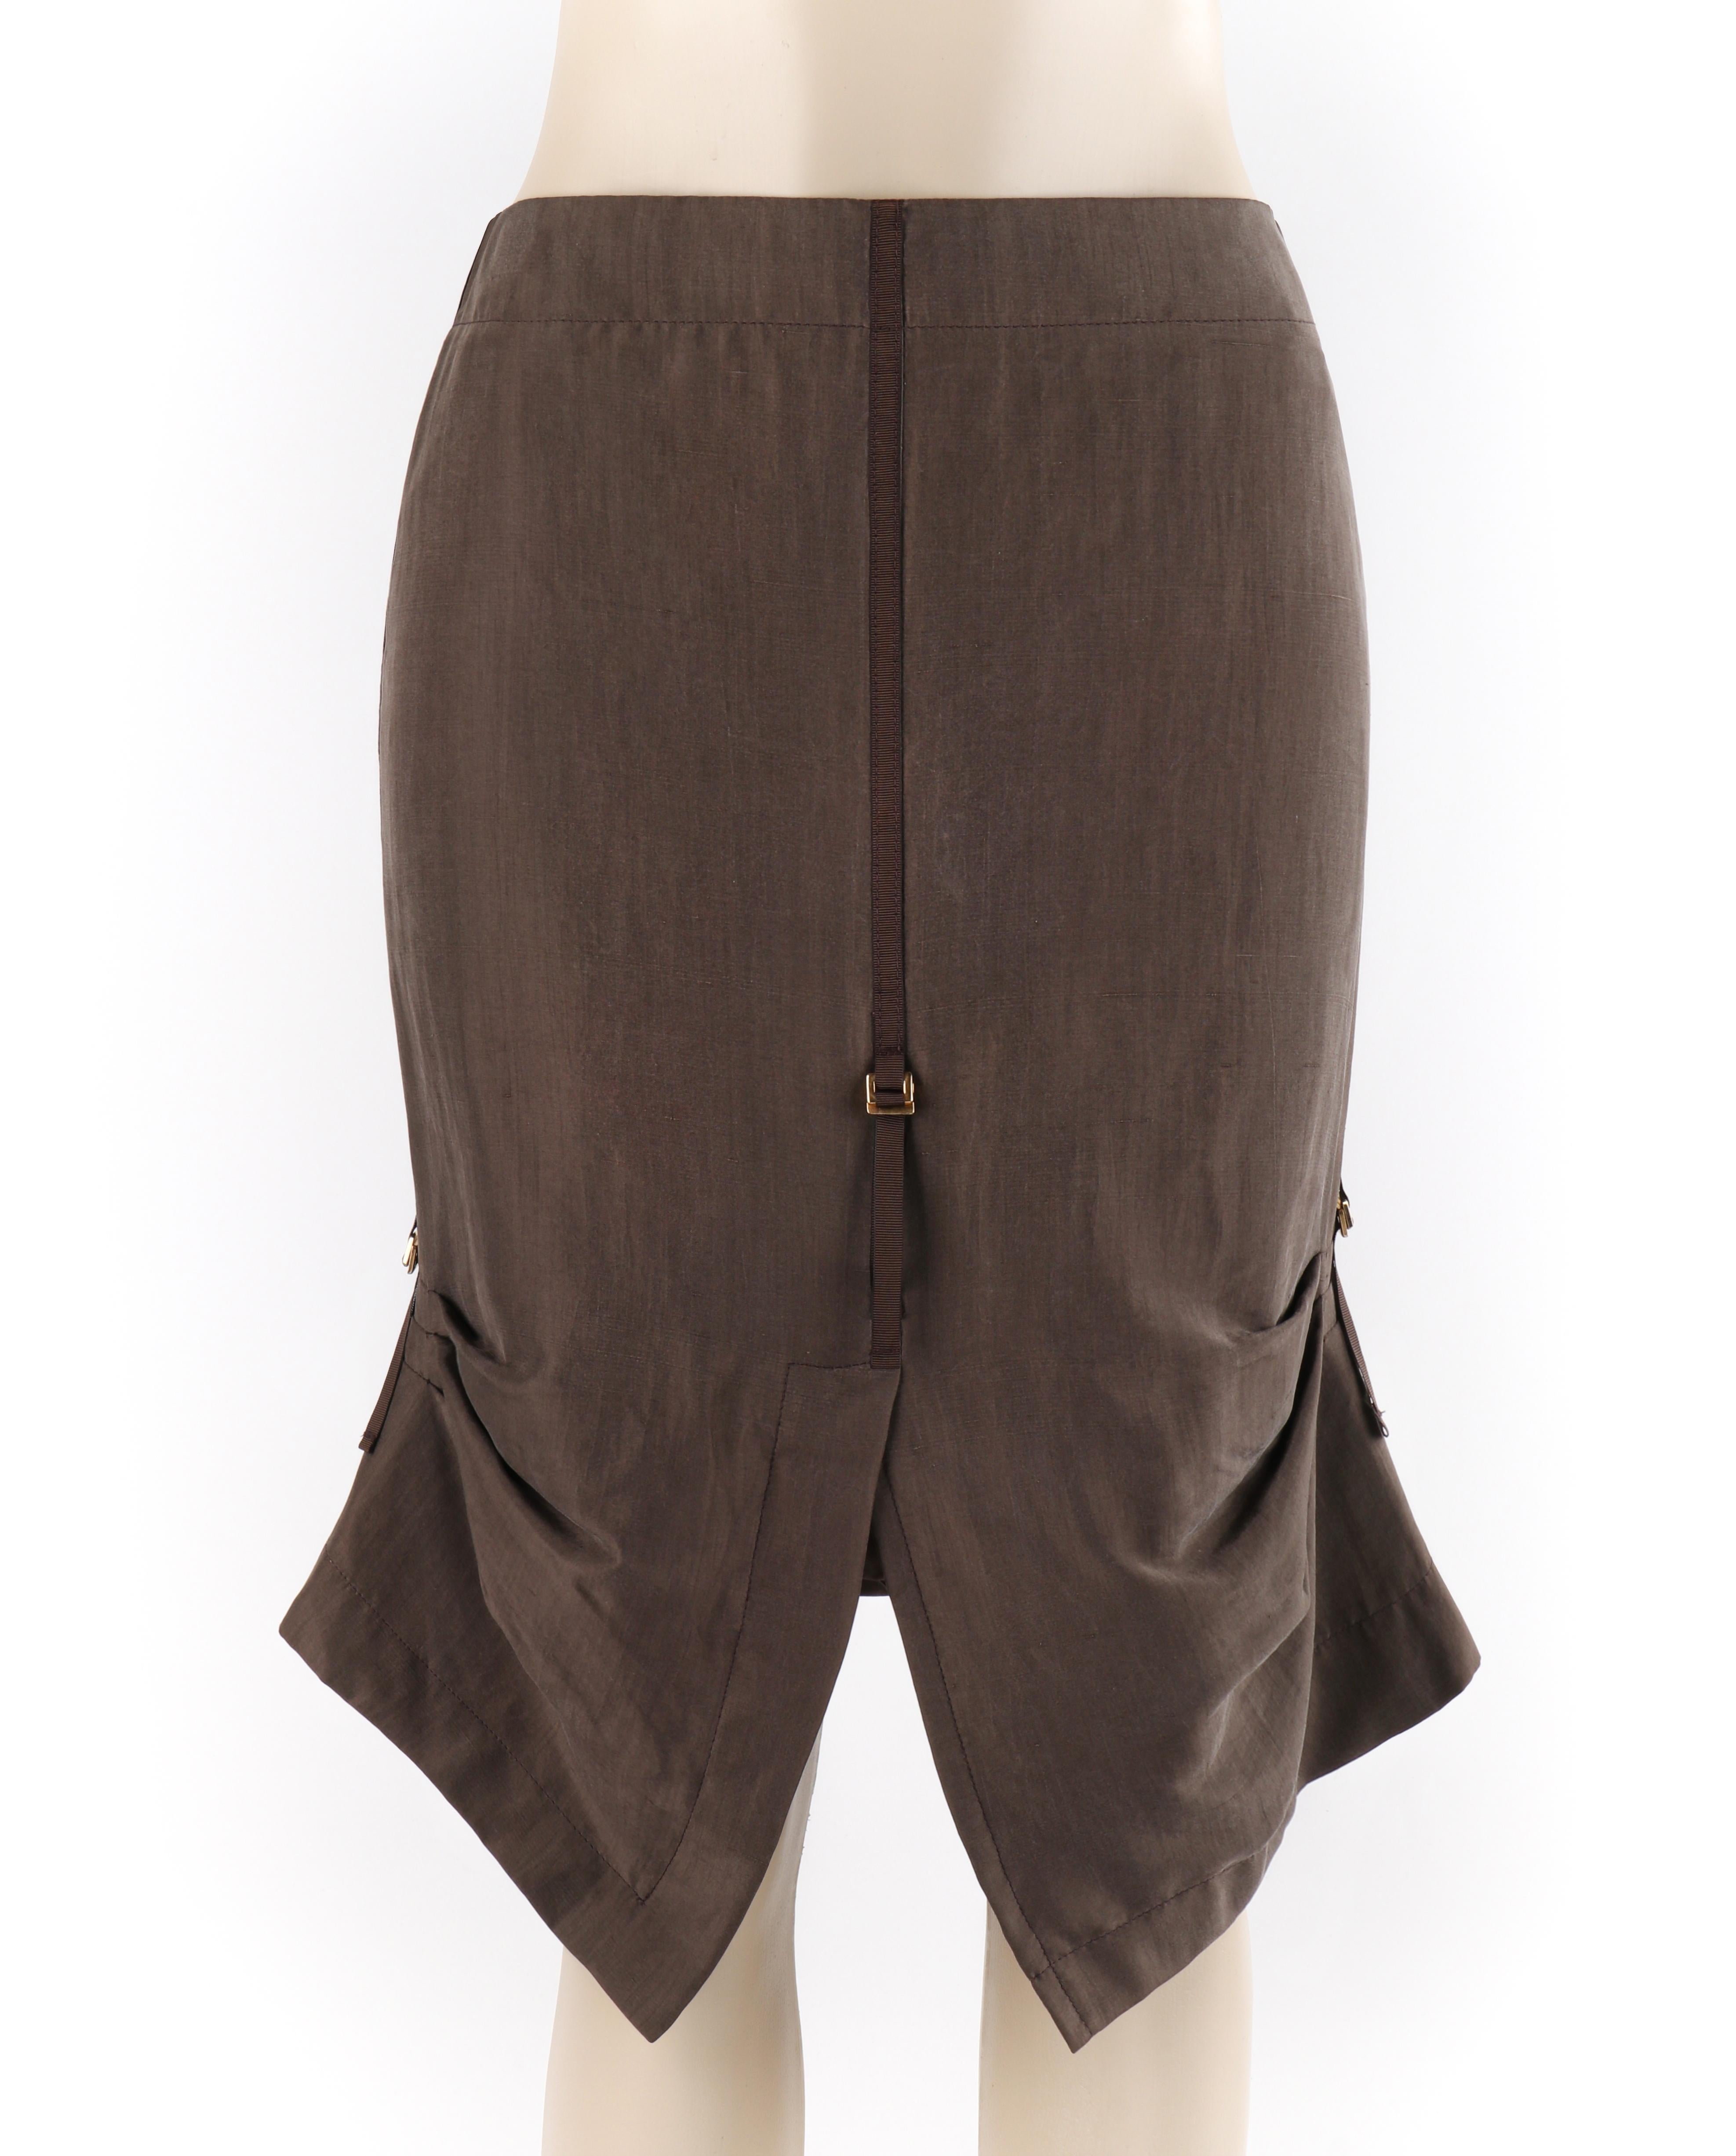 ALEXANDER McQUEEN S/S 1996 Brown Silk Horizontal Pleated Ruched Adjustable Skirt
 
Brand / Manufacturer: Alexander McQueen 
Collection: S/S 1996 
Style: Pencil Skirt
Color(s): Shades of brown
Lined: Yes
Marked Fabric Content: 100% silk exterior; 60%